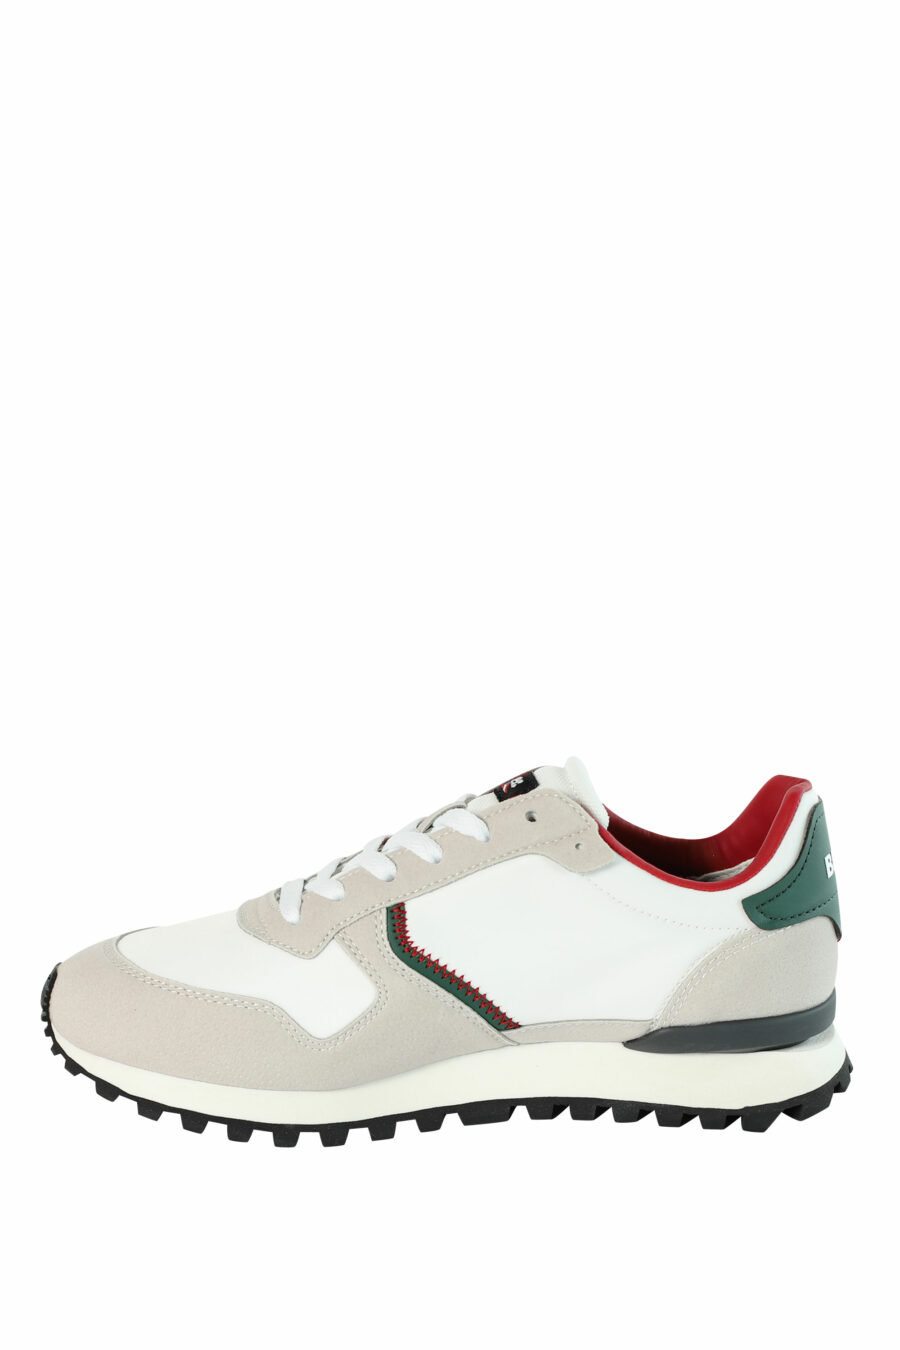 Trainers "DIXON" white mix with red and green details - 8058156493902 3